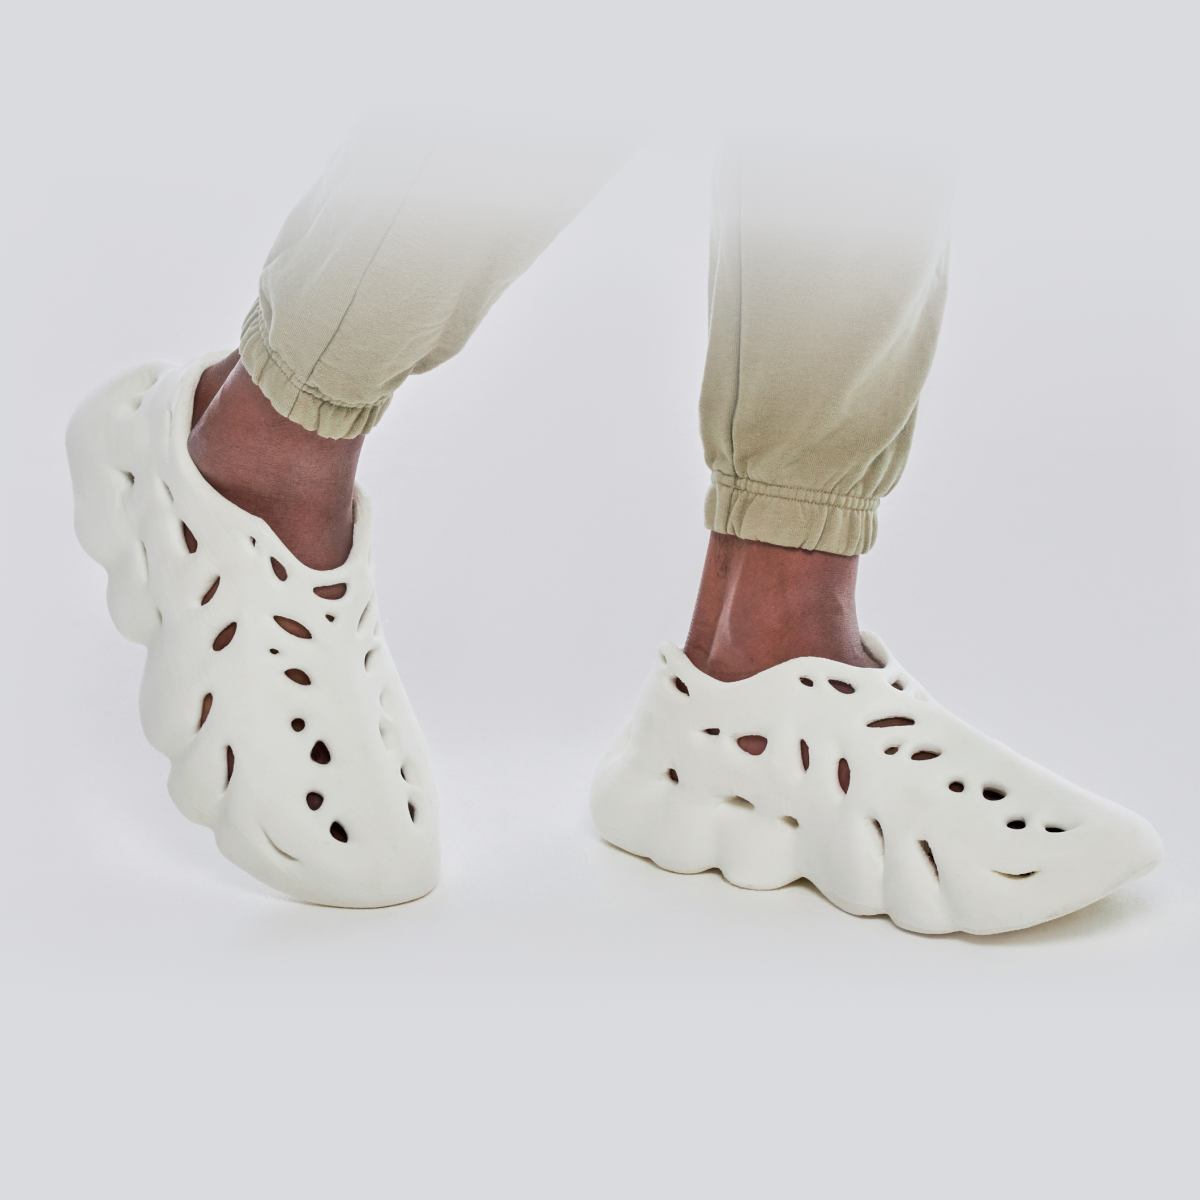 ELASTIUM unveils its first collection of 3D printed foam sneakers - 3D ...